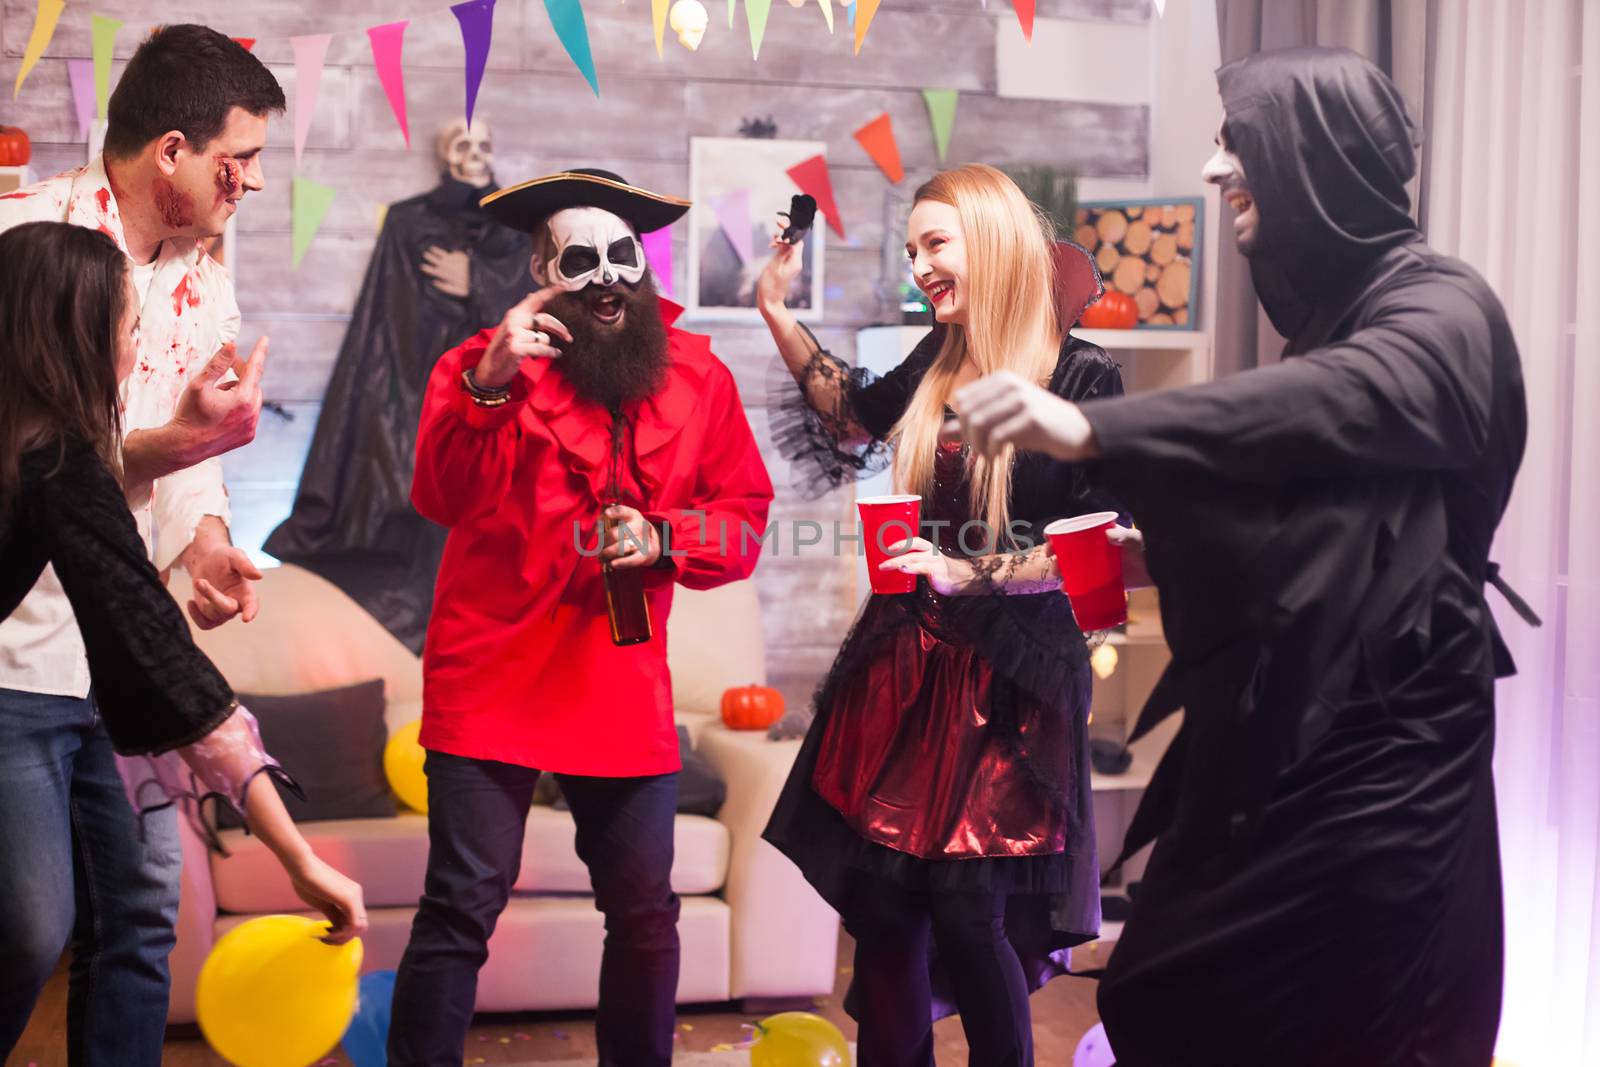 Grim reaper and pirate dancing while celebrating halloween . Spooky costumes.